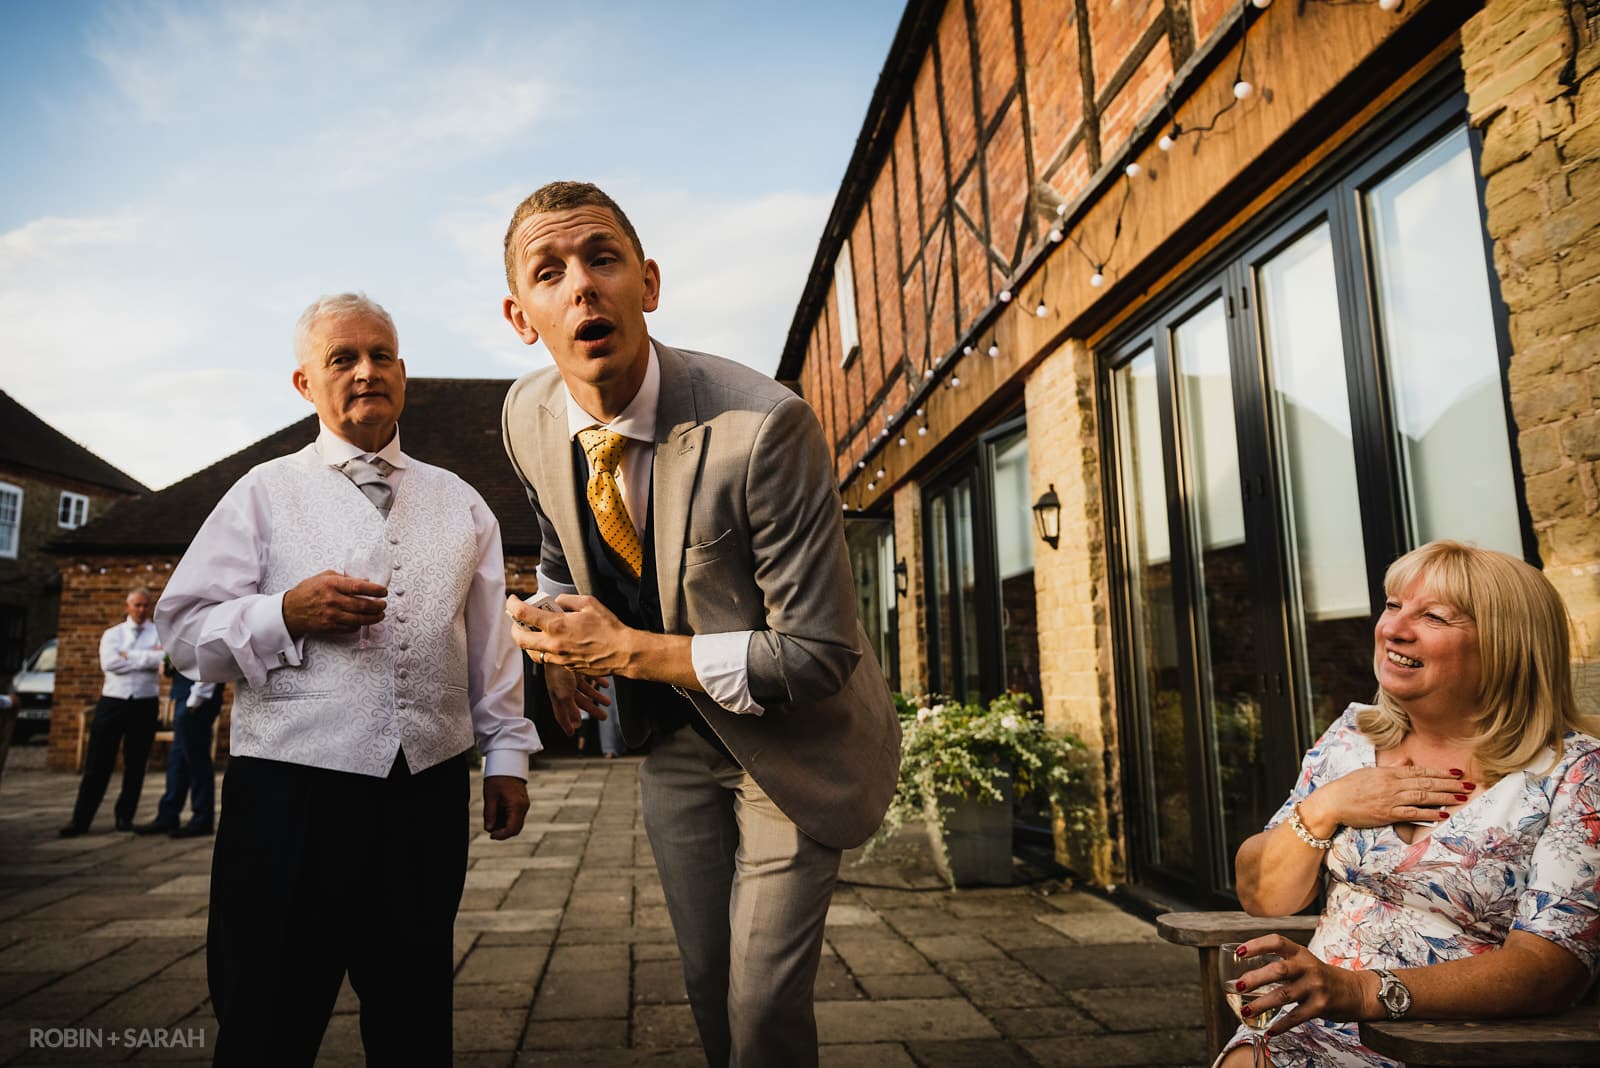 Bride, groom and wedding guests entertained by magician